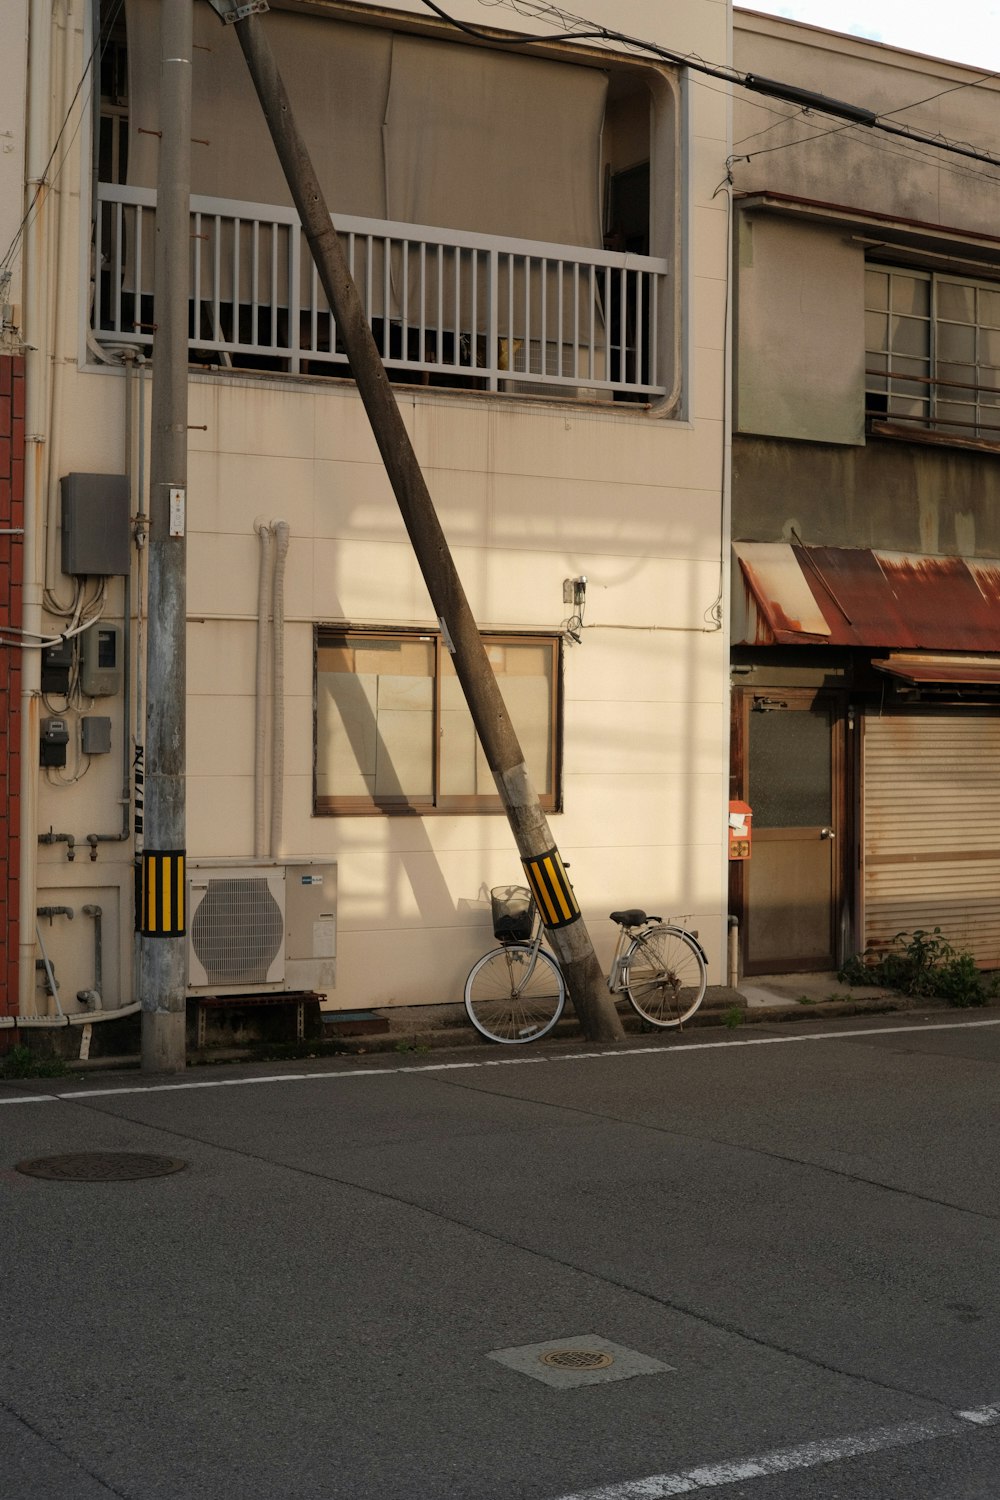 a bicycle leaning against a pole on a city street